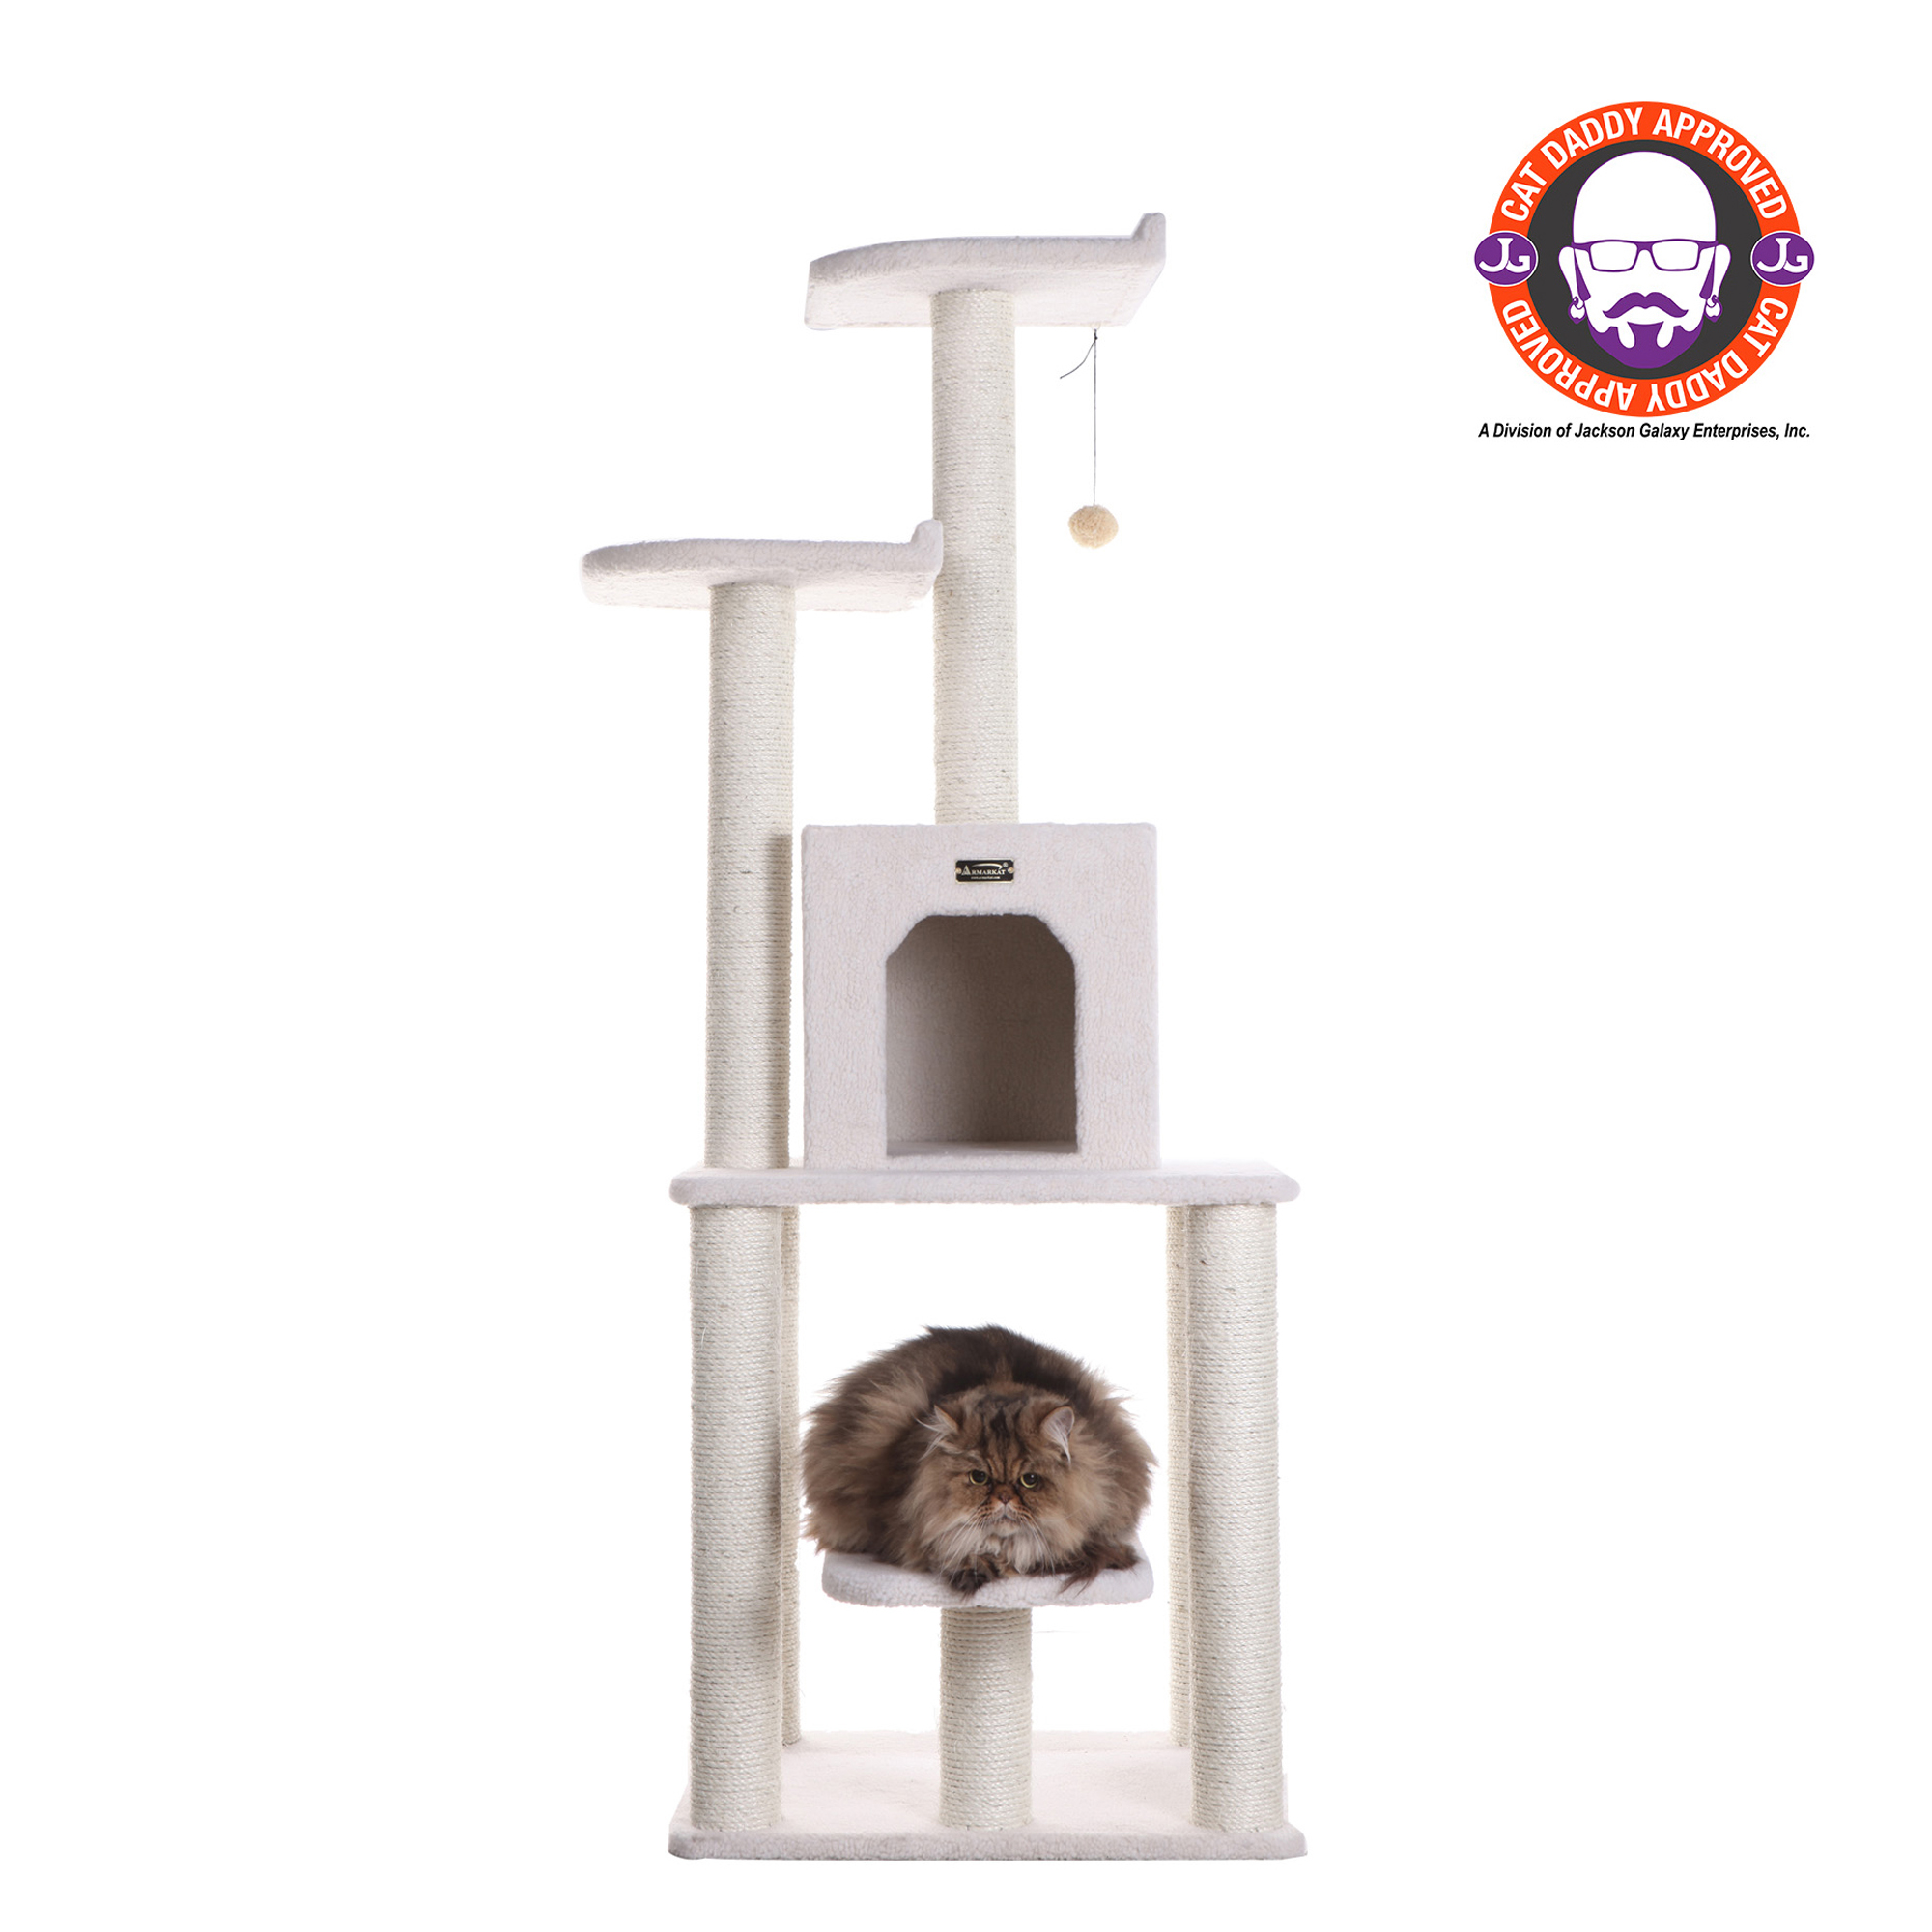 Picture of Armarkat B6203 Classic Real Wood Cat Tree  Jackson Galaxy Approved  Five Levels With Condo and Two Perches